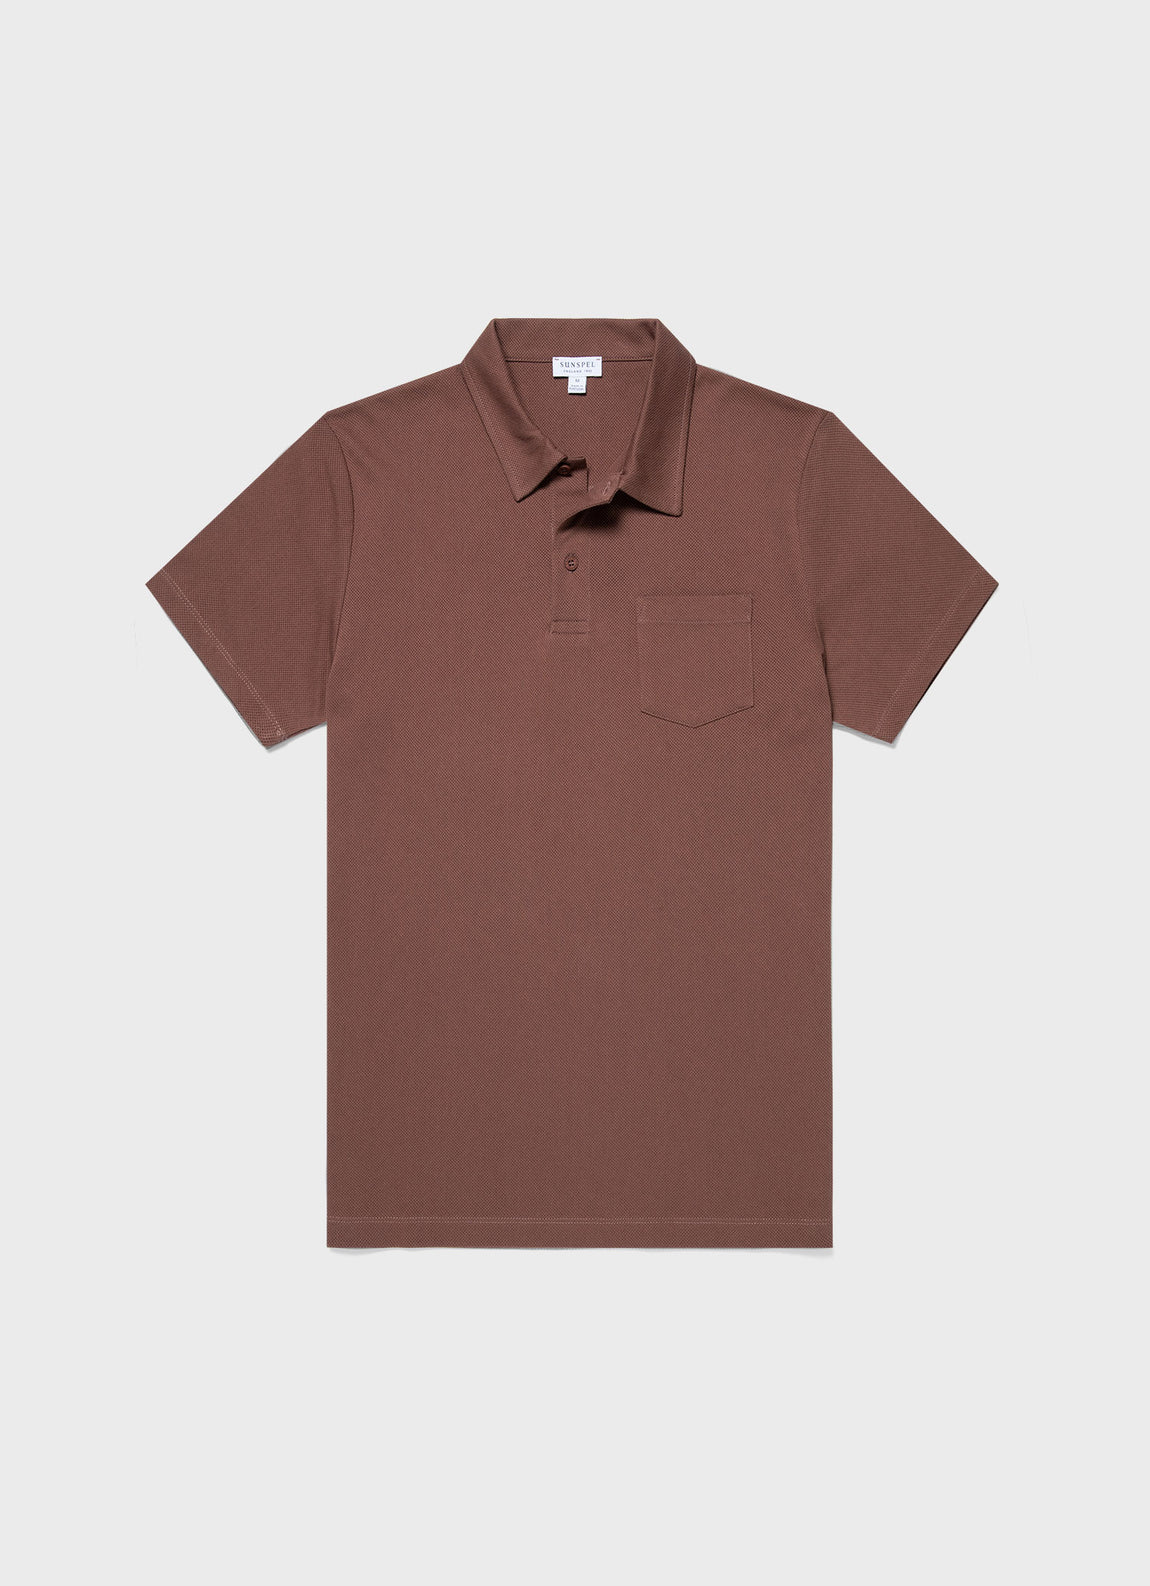 Men's Riviera Polo Shirt in Brown